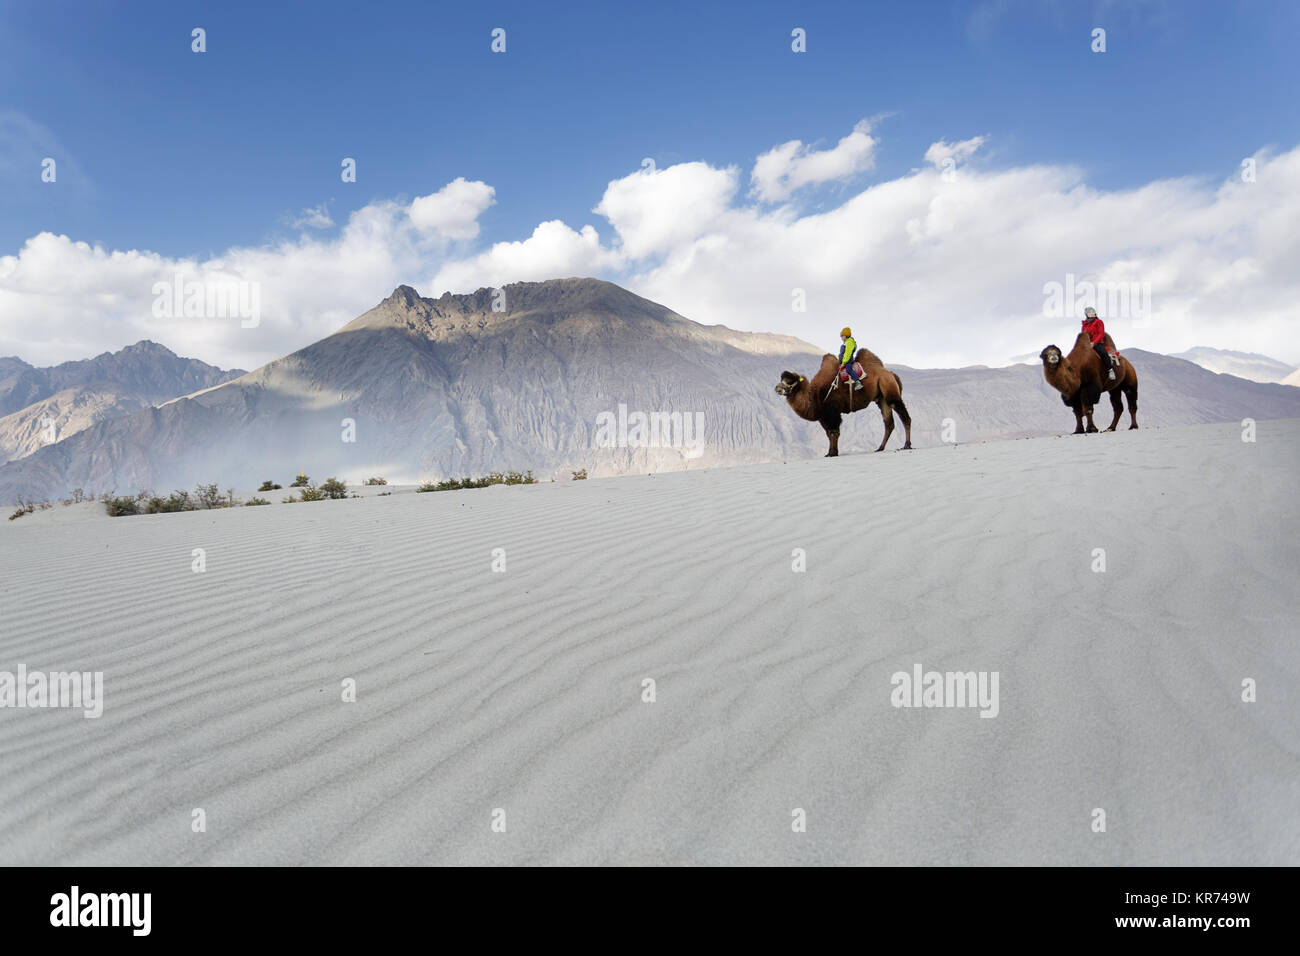 Mother and son riding double hump camels and crossing the desert in the Nubra valley, Ladakh, Jammu and Kashmir, India Stock Photo